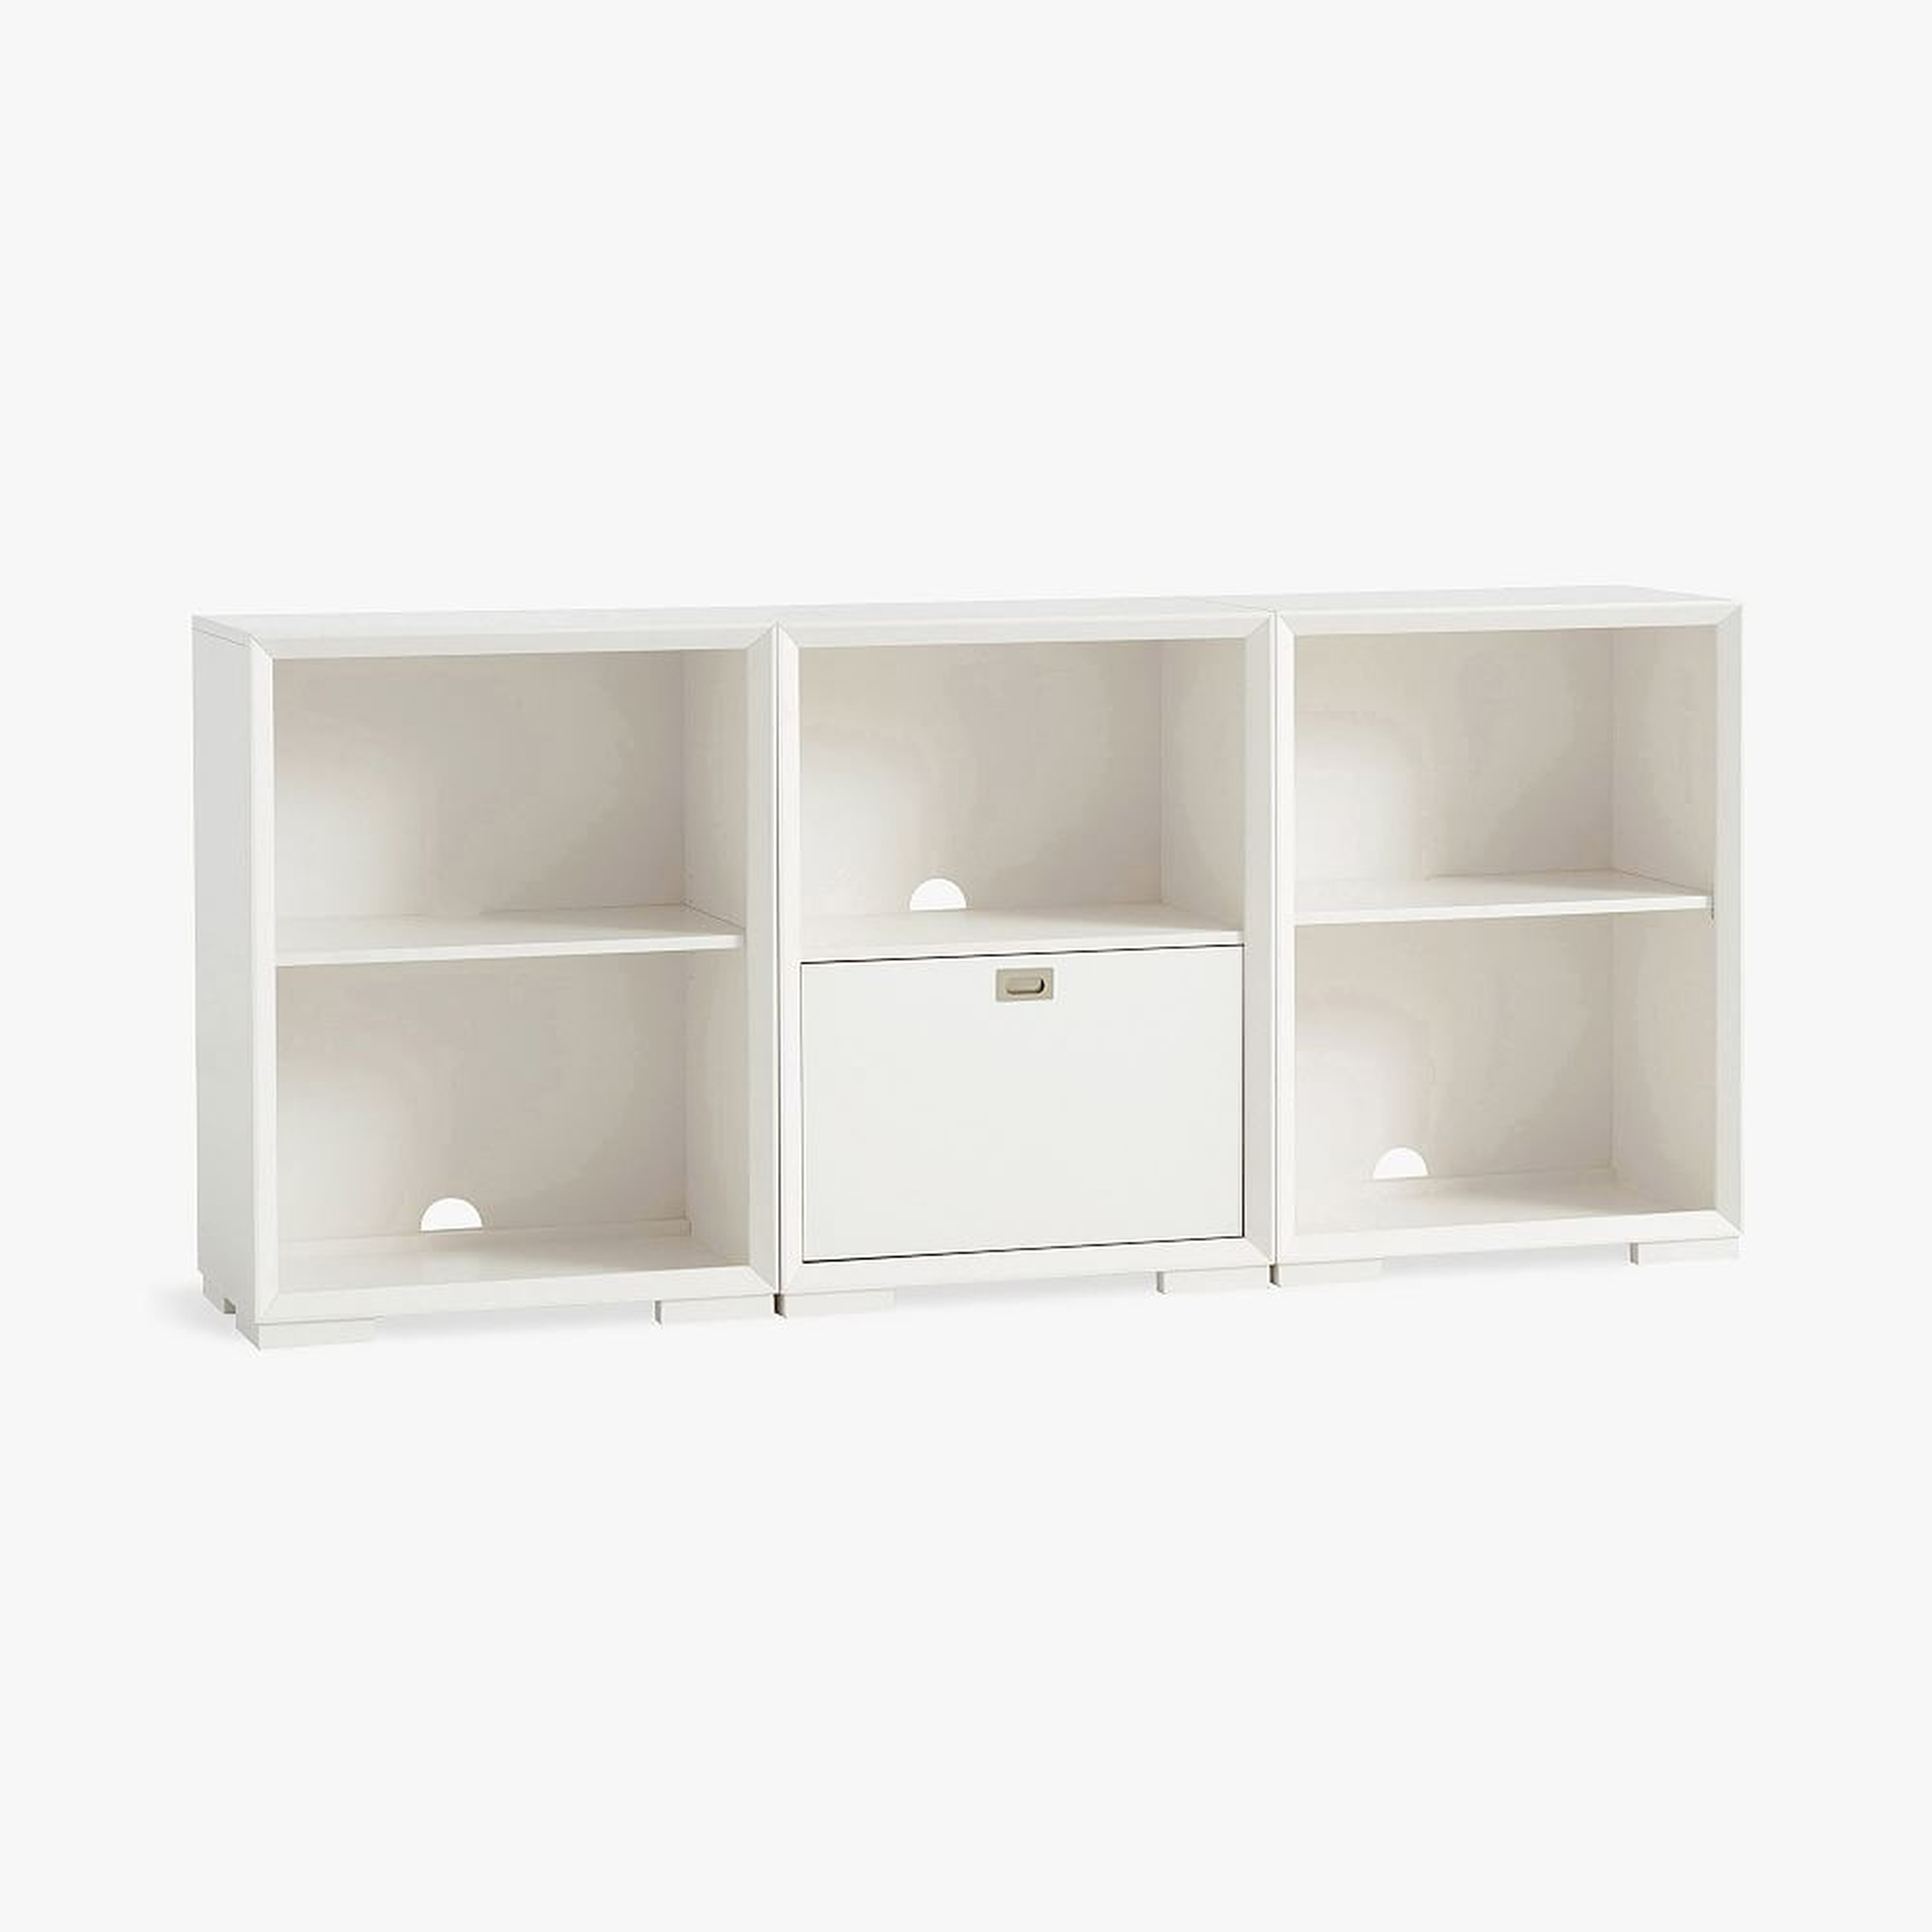 Callum Mixed Shelf Bookcase, 2 Bookcase & 1 One-Drawer, Simply White, In-Home - Pottery Barn Teen